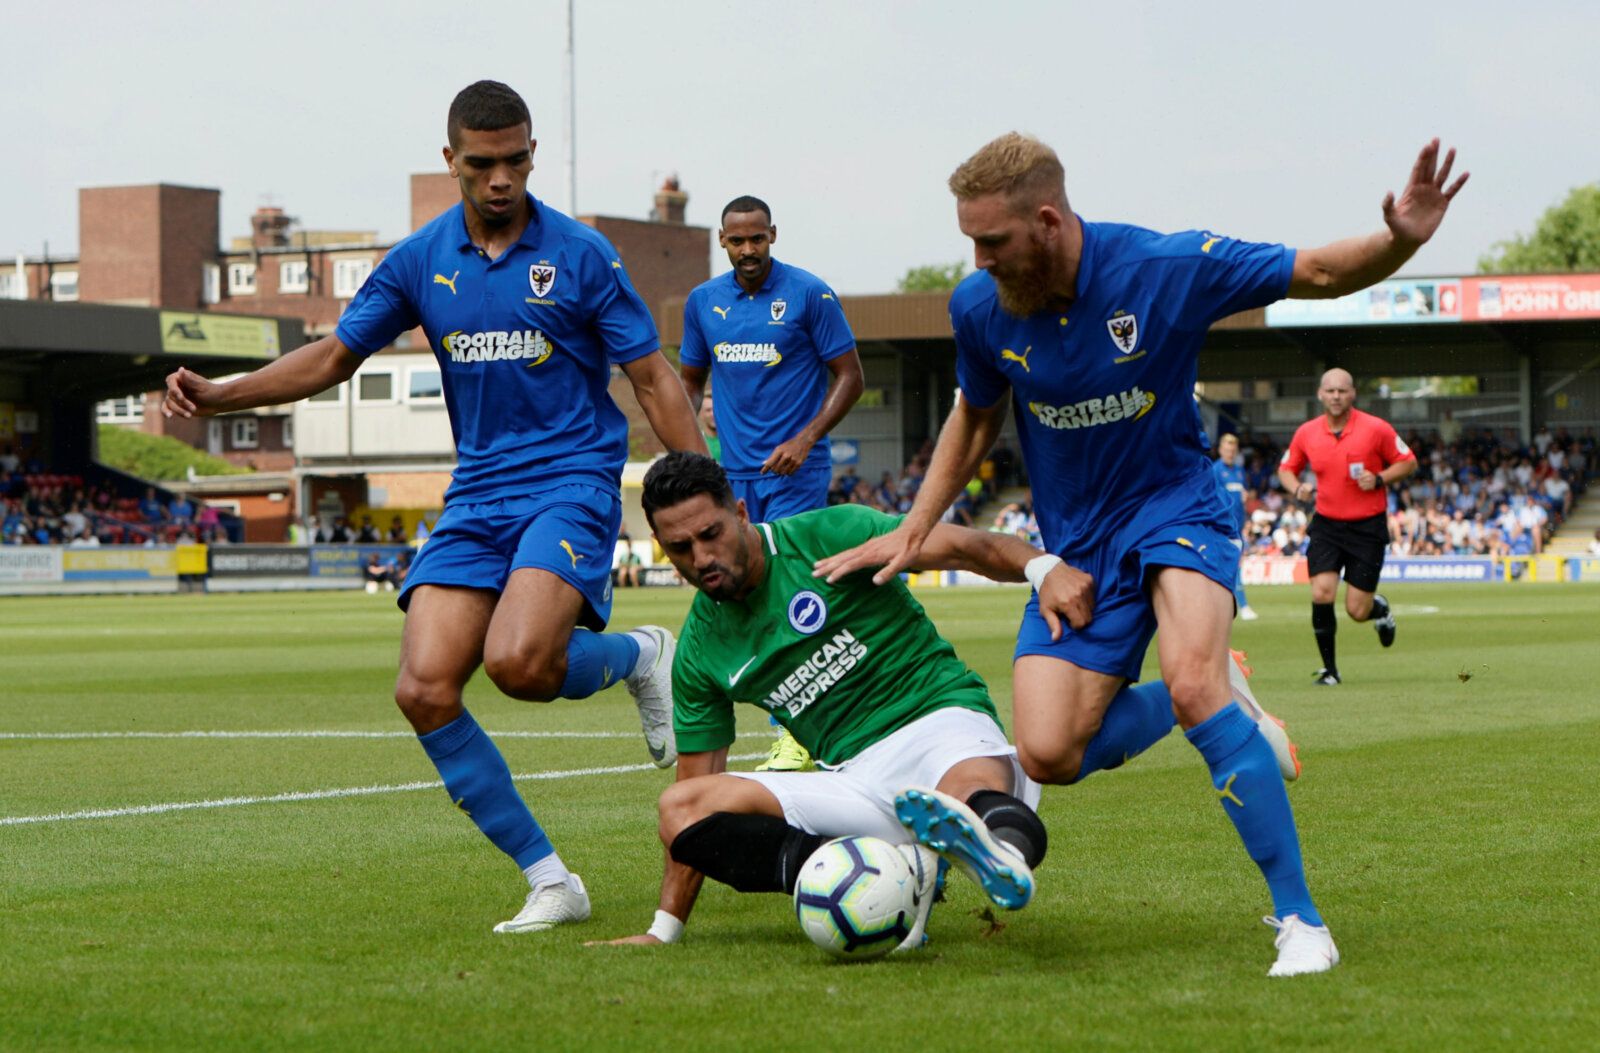 Soccer Football - Pre Season Friendly - AFC Wimbledon v Brighton &amp; Hove Albion - The Cherry Red Records Stadium, London, Britain - July 21, 2018   Brighton's Beram Kayal in action with AFC Wimbledon's Tennai Watson and Scott Wagstaff   Action Images via Reuters/Adam Holt